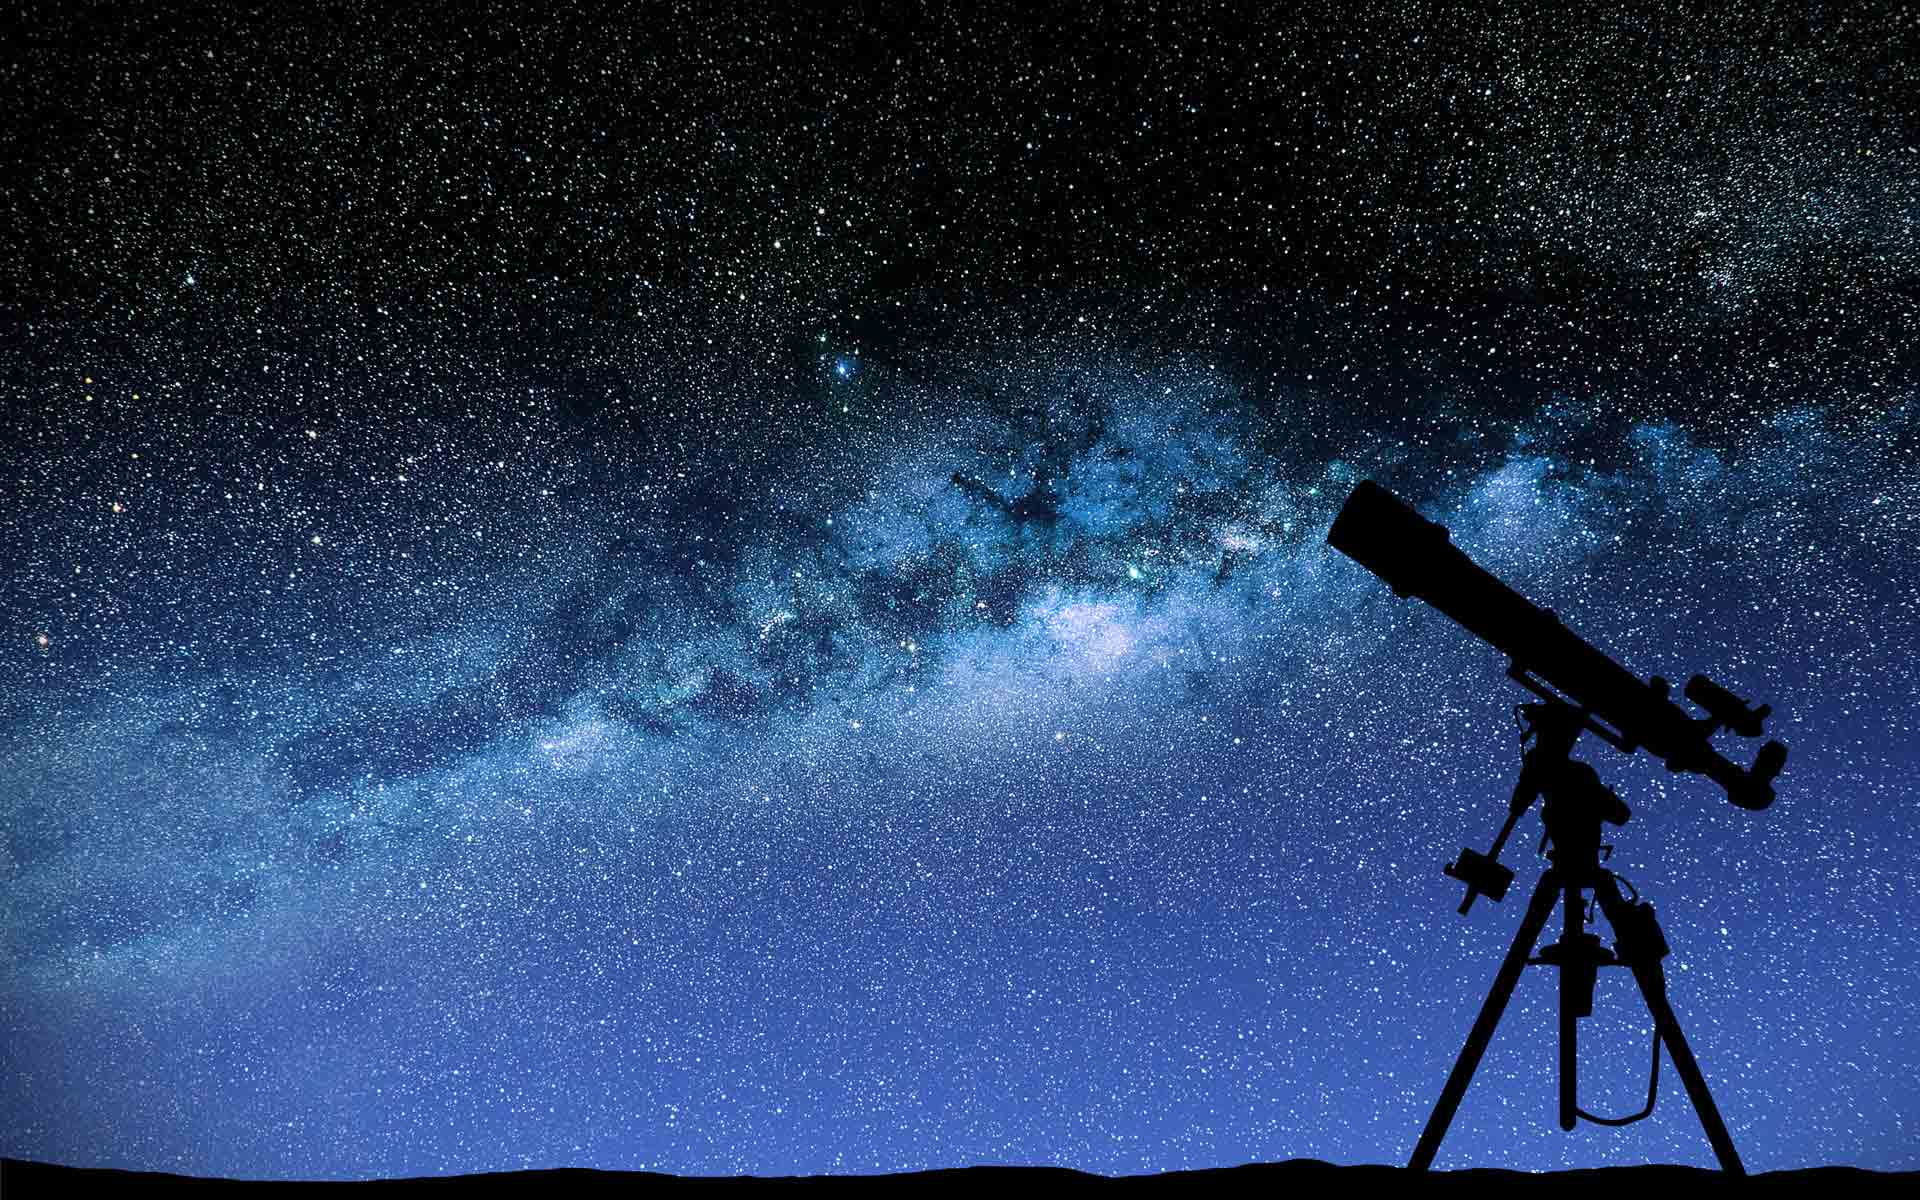 An image of a starry sky and a telescope